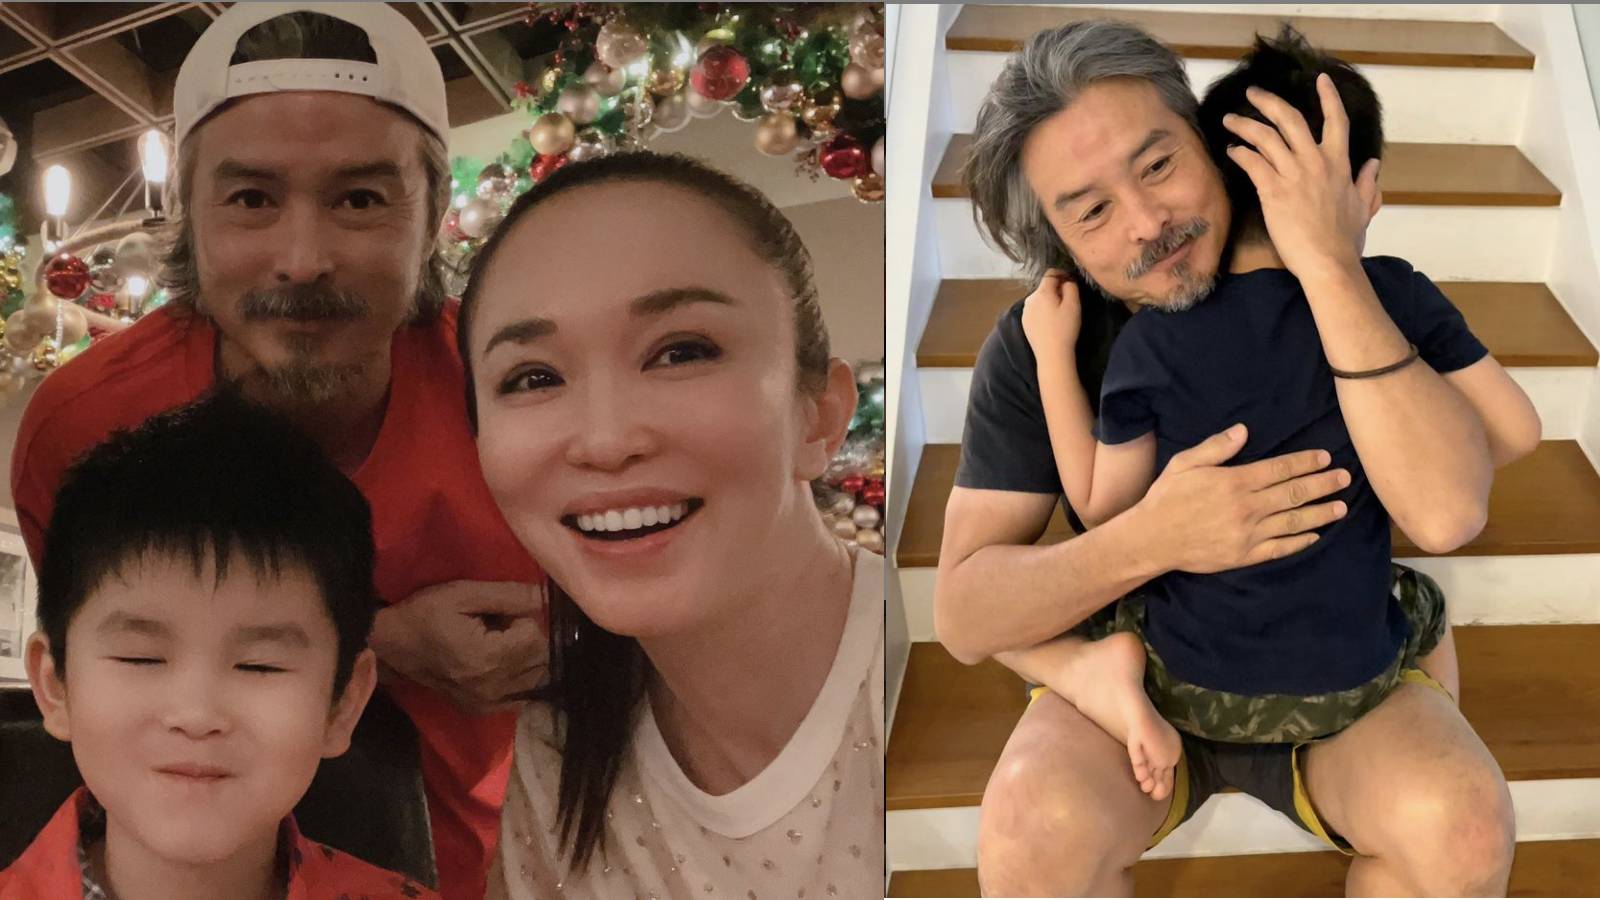 Christopher Lee Reunited With Fann Wong And Zed In Singapore… Just In Time For Fann’s 50th Birthday